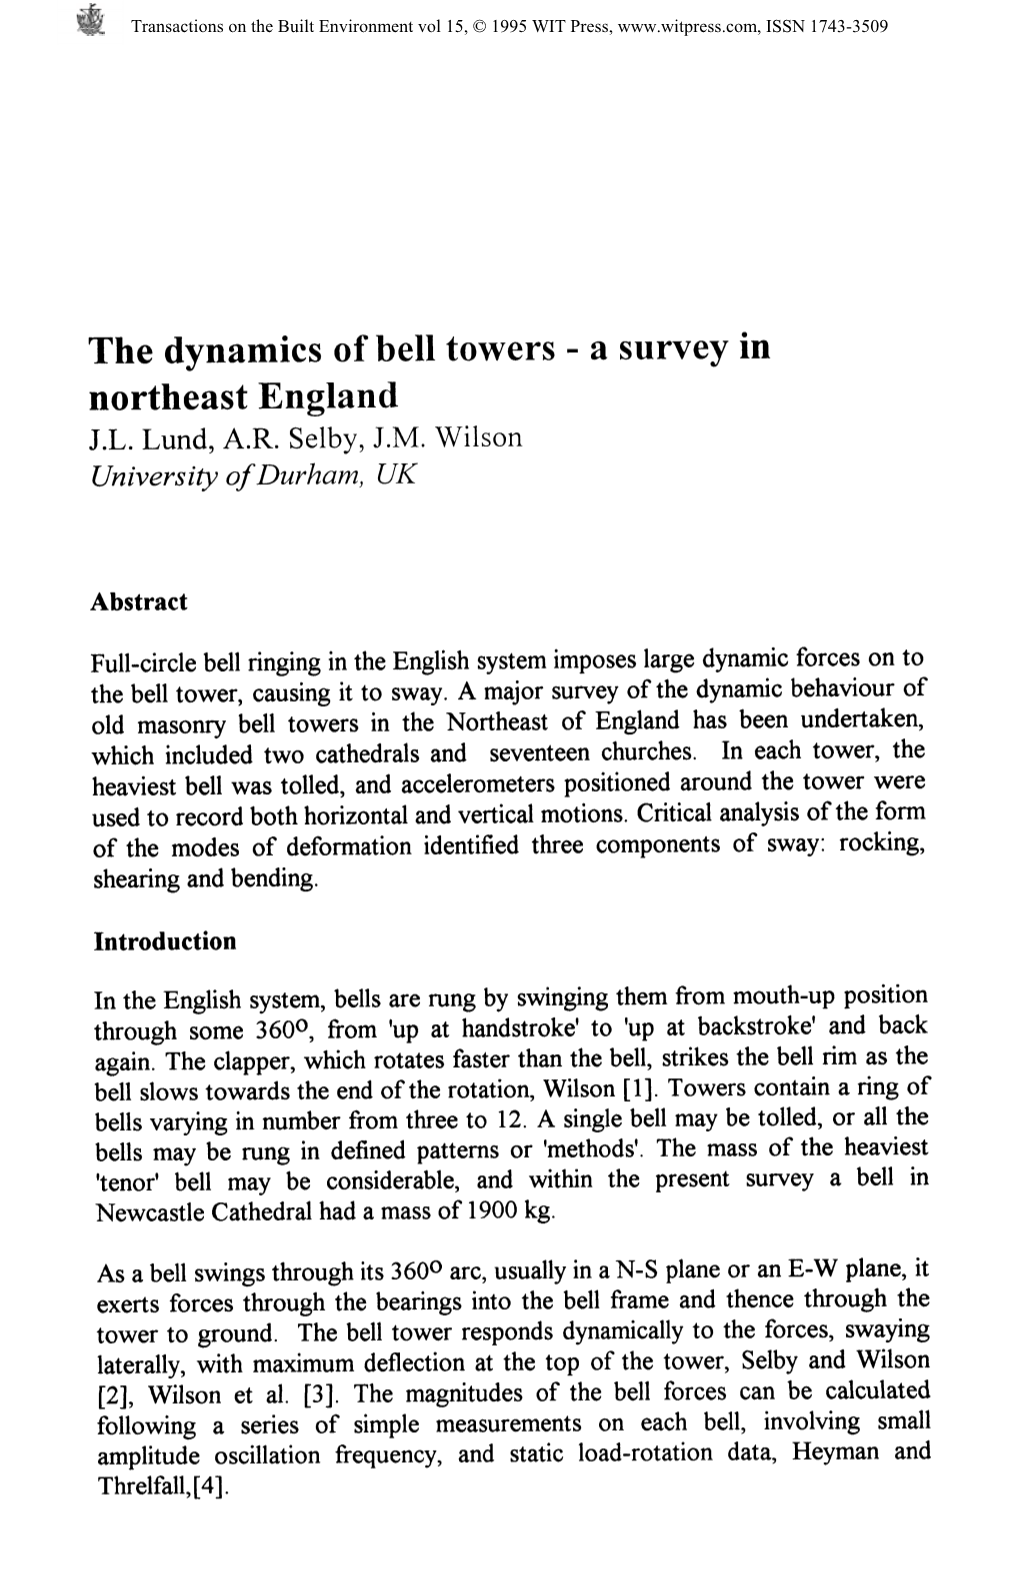 The Dynamics of Bell Towers - a Survey in Northeast England J.L